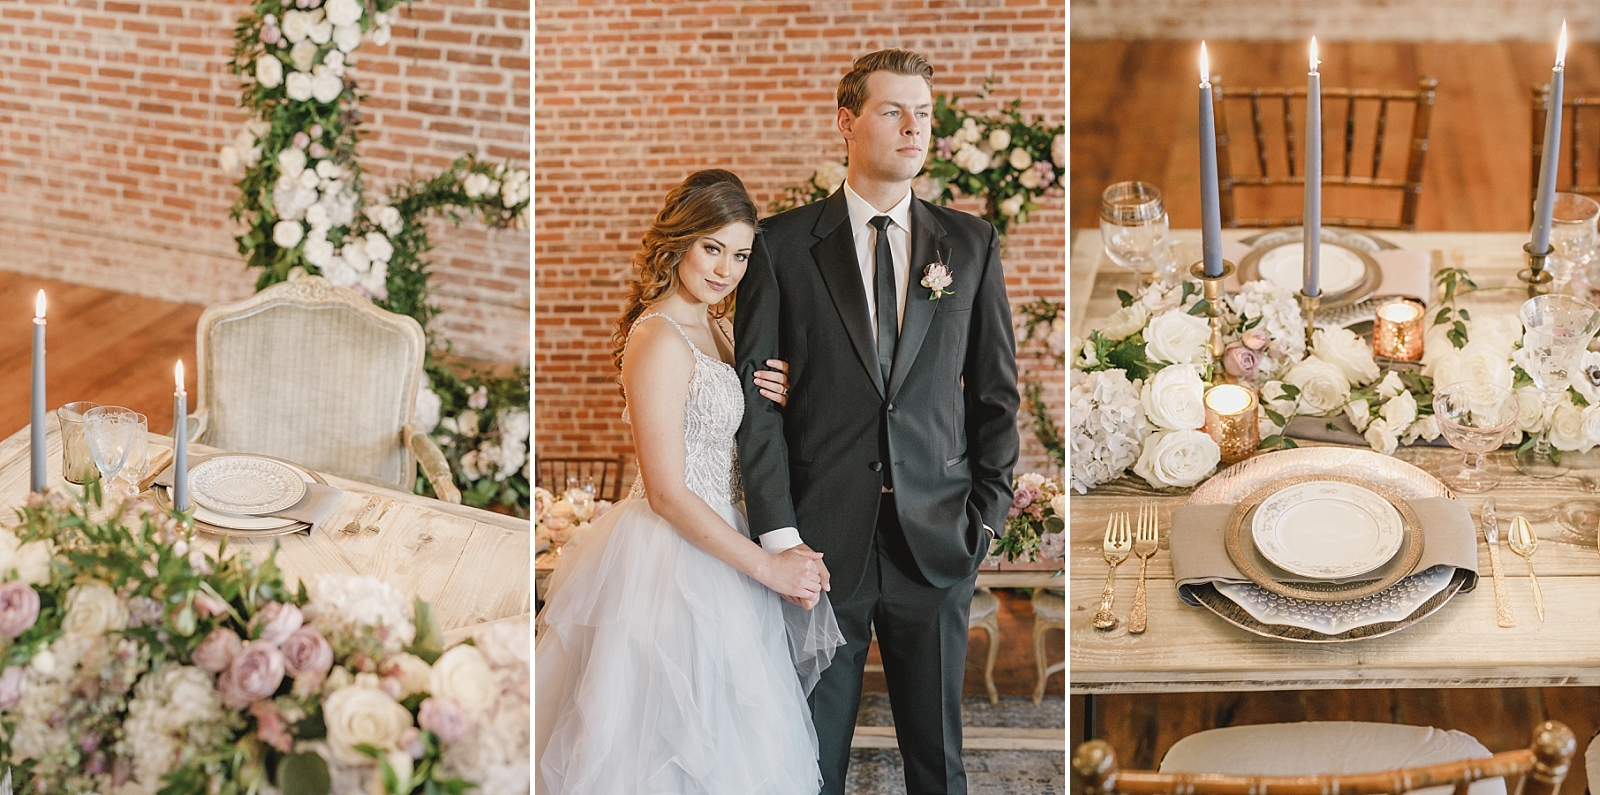 Romantic and vintage ceremony details at Franciscan Gardens